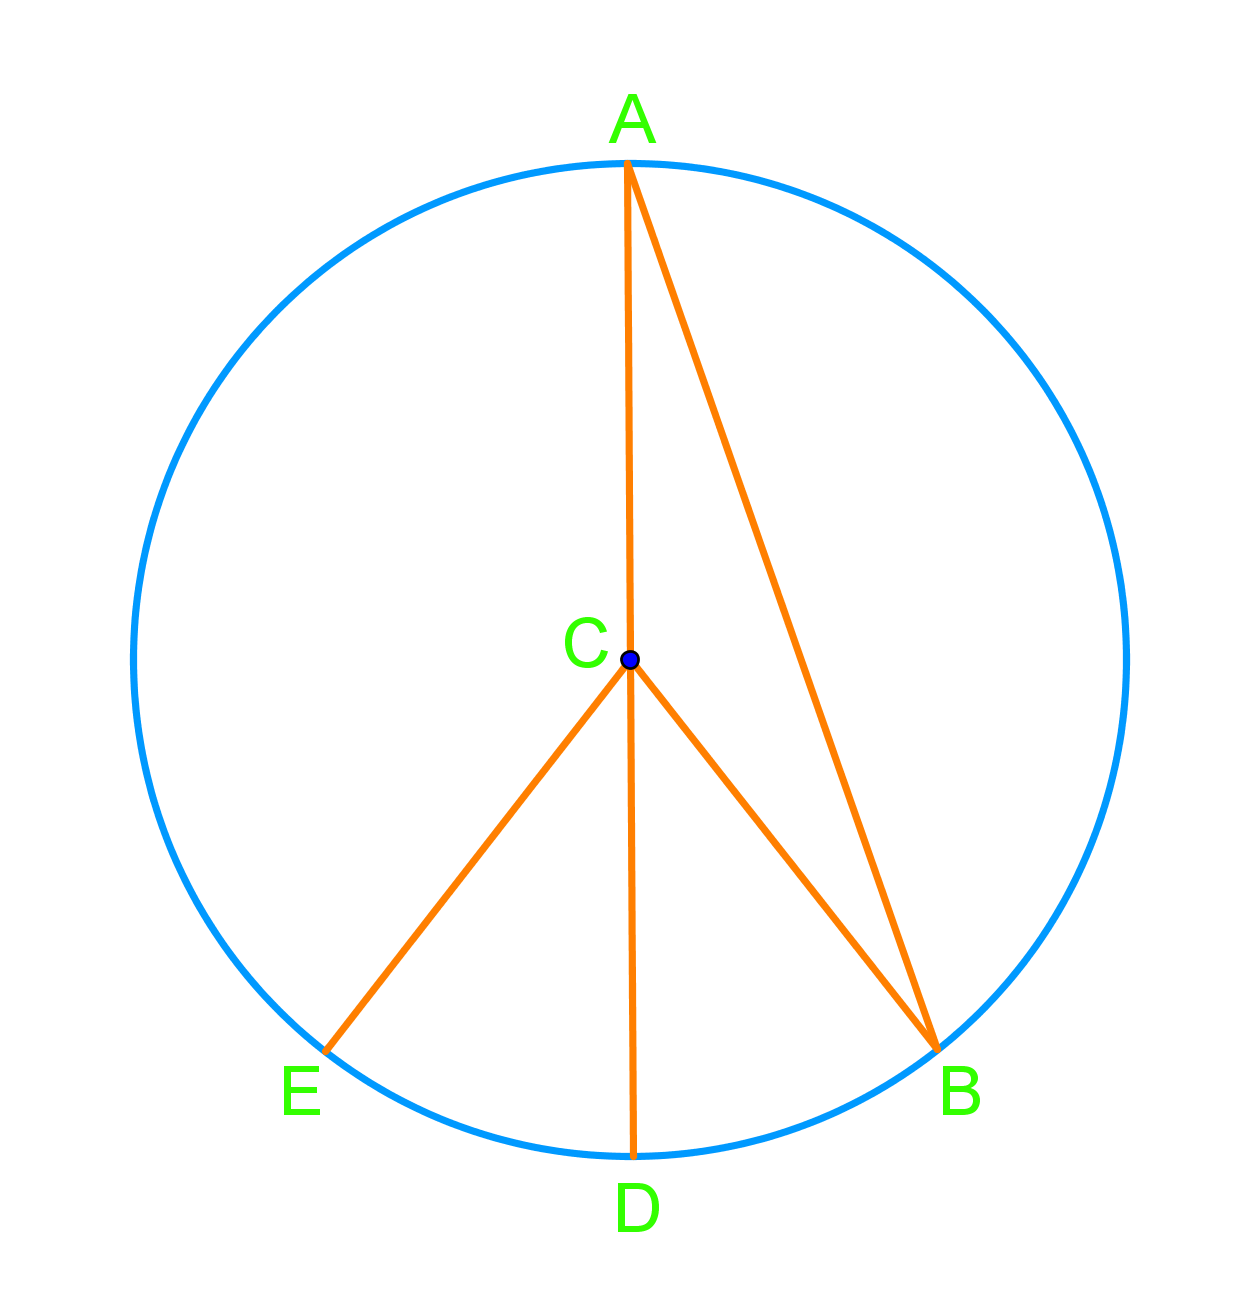 Central and inscribed angles in circles